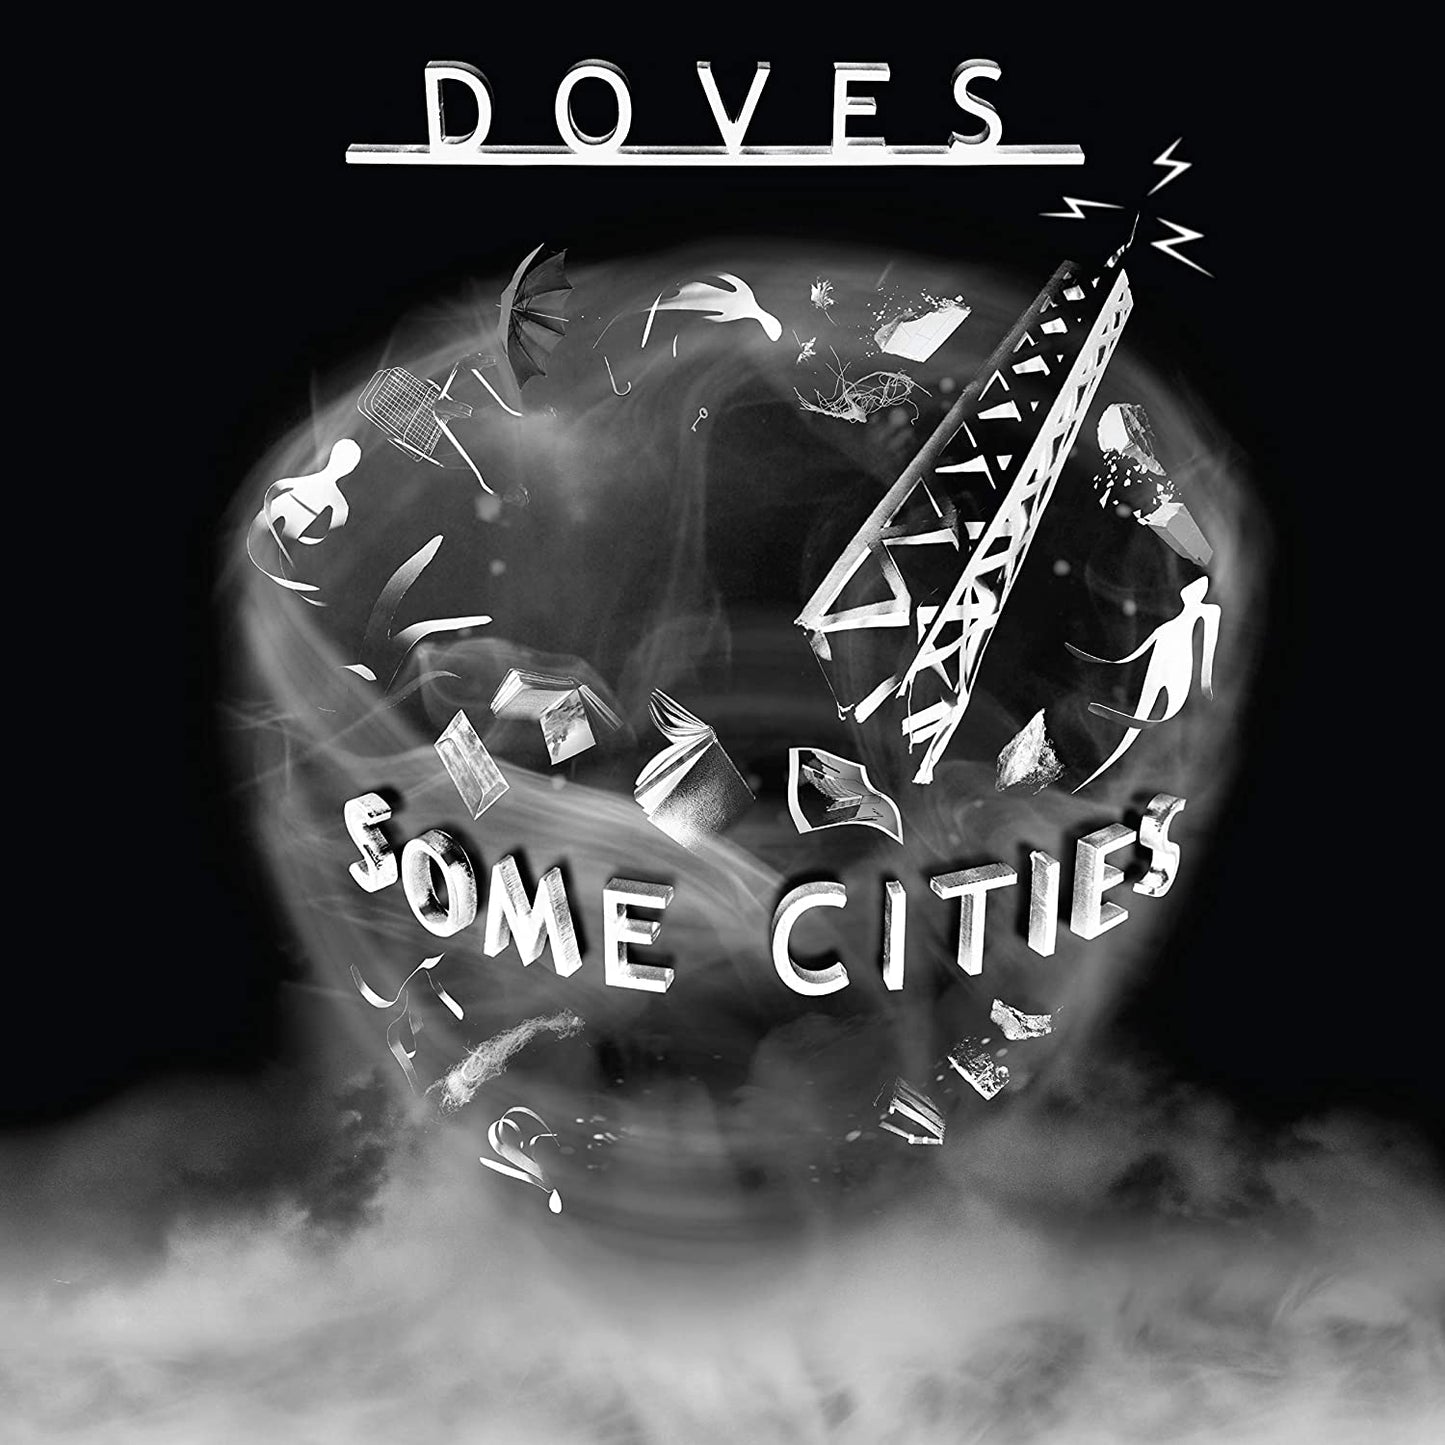 The Doves – Some Cities – LP